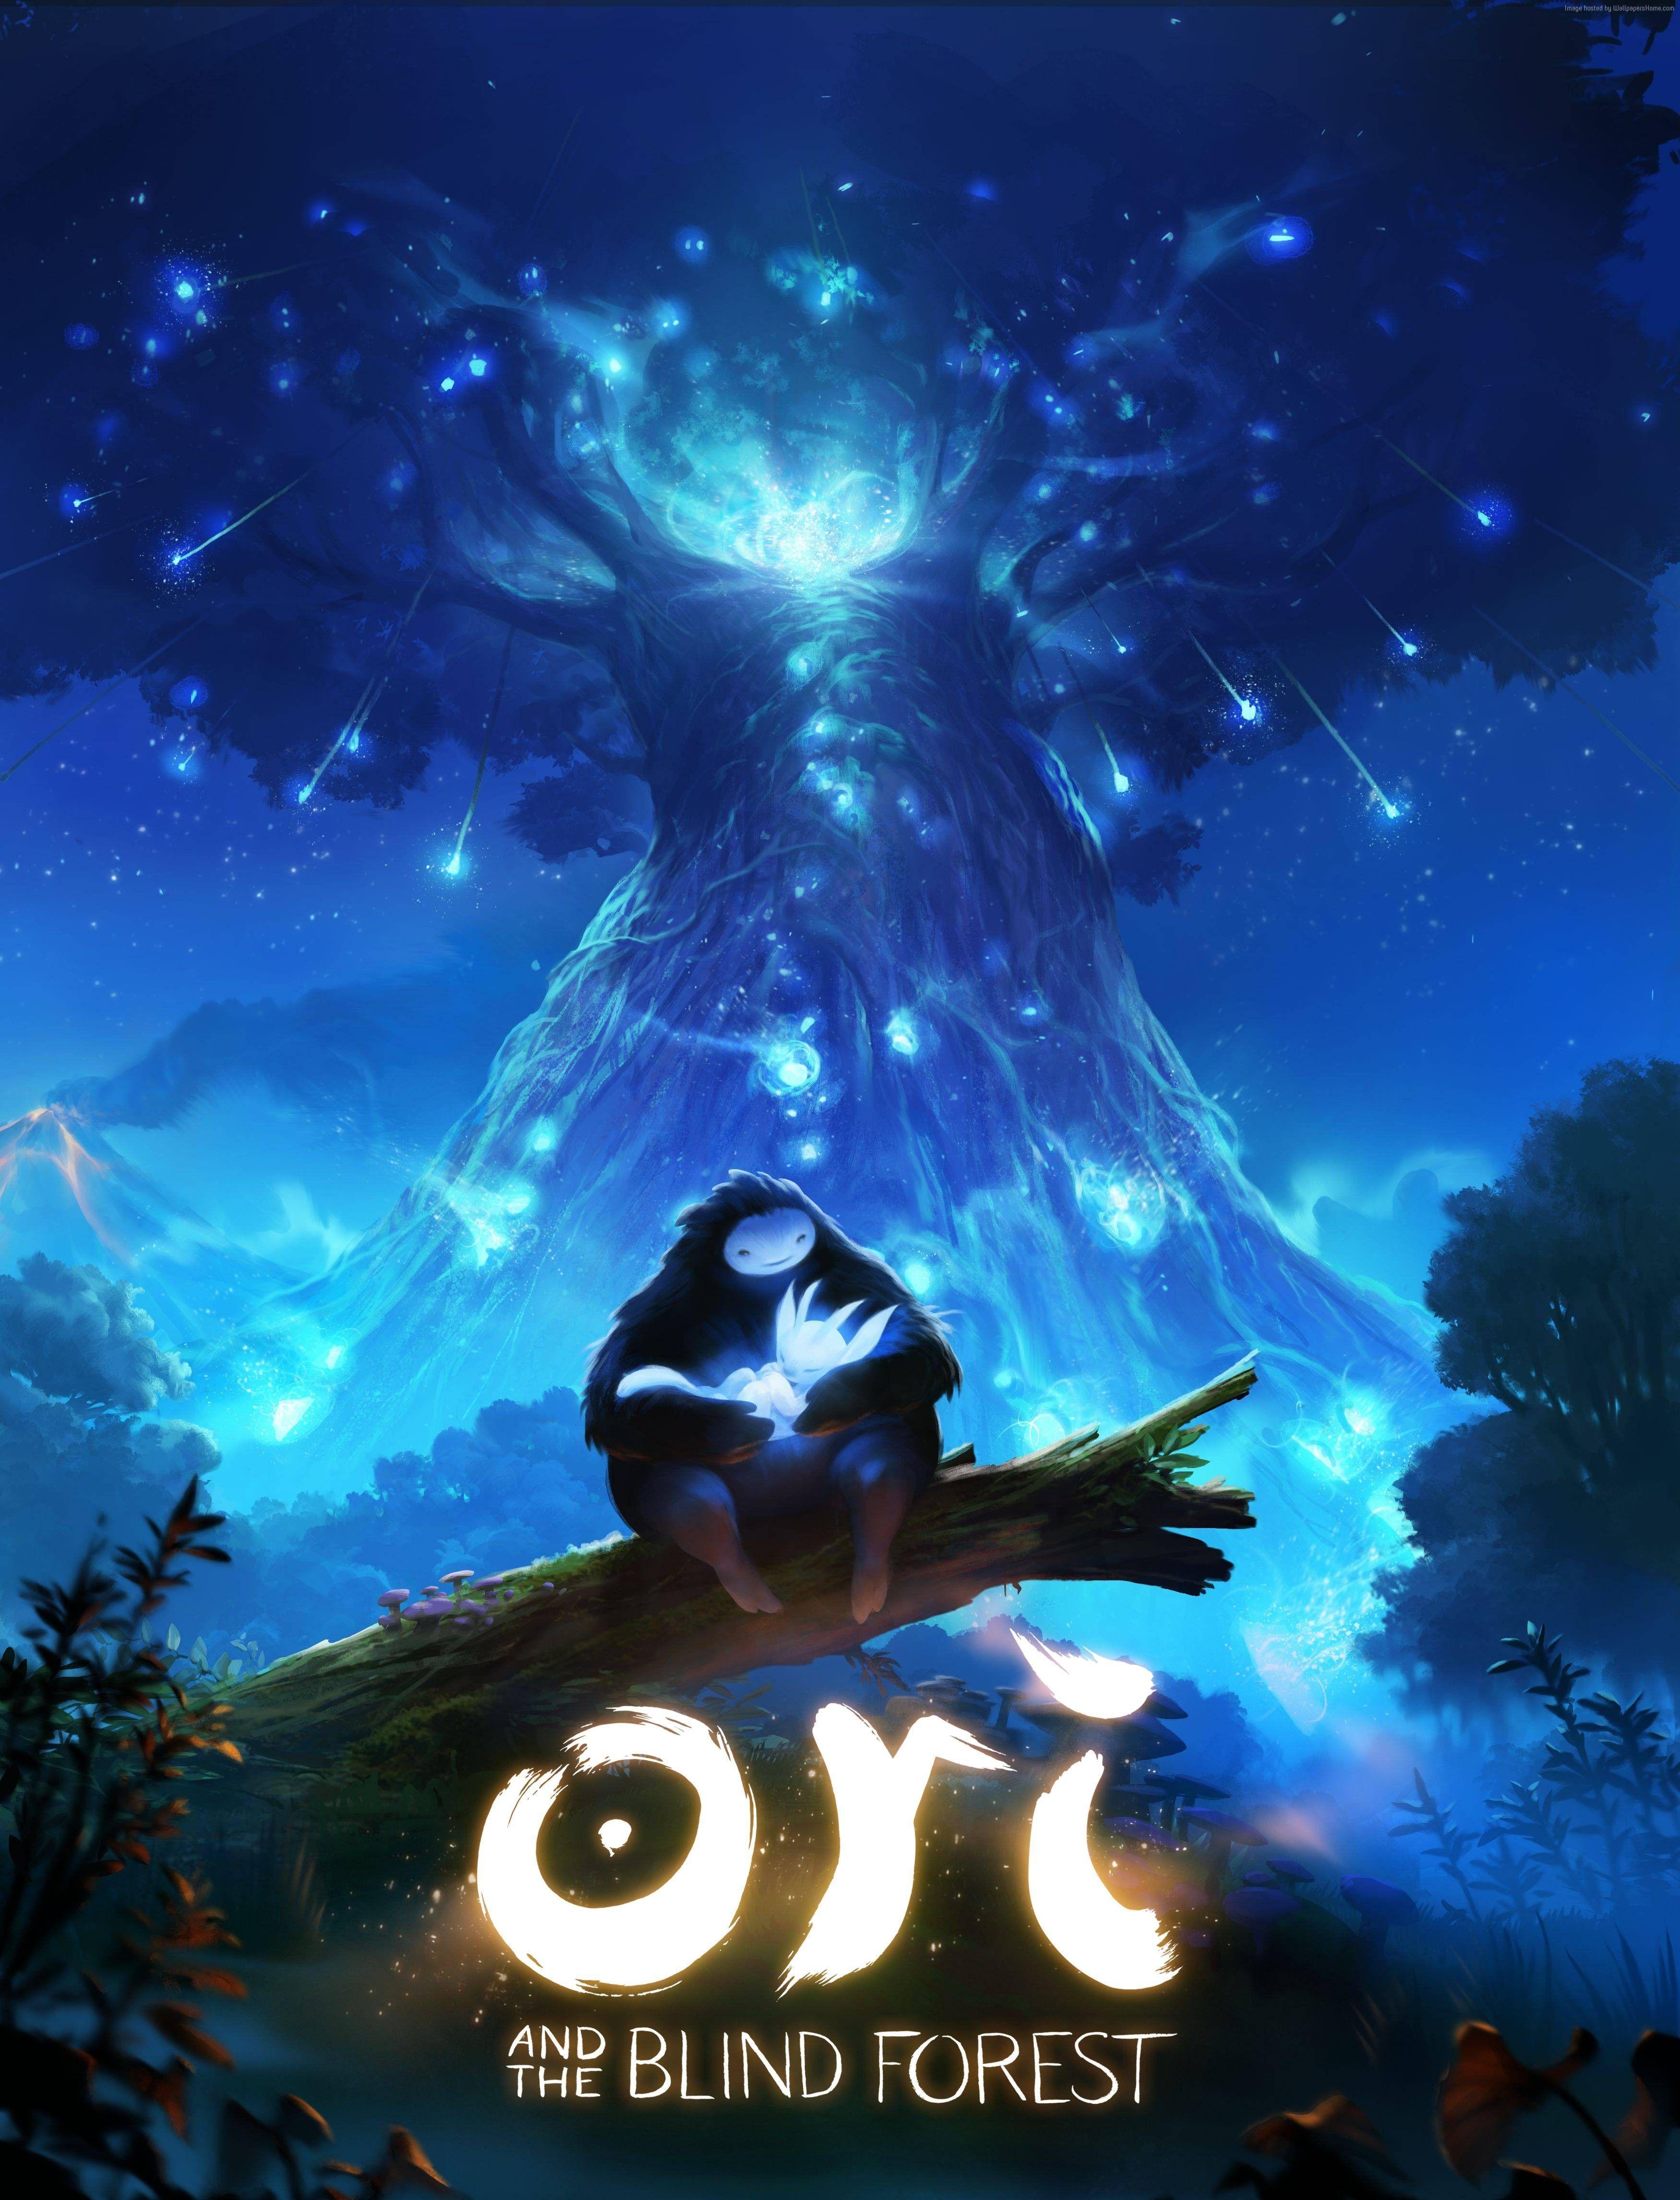 Ori and the Blind Forest Wallpaper, Games: Ori and the Blind